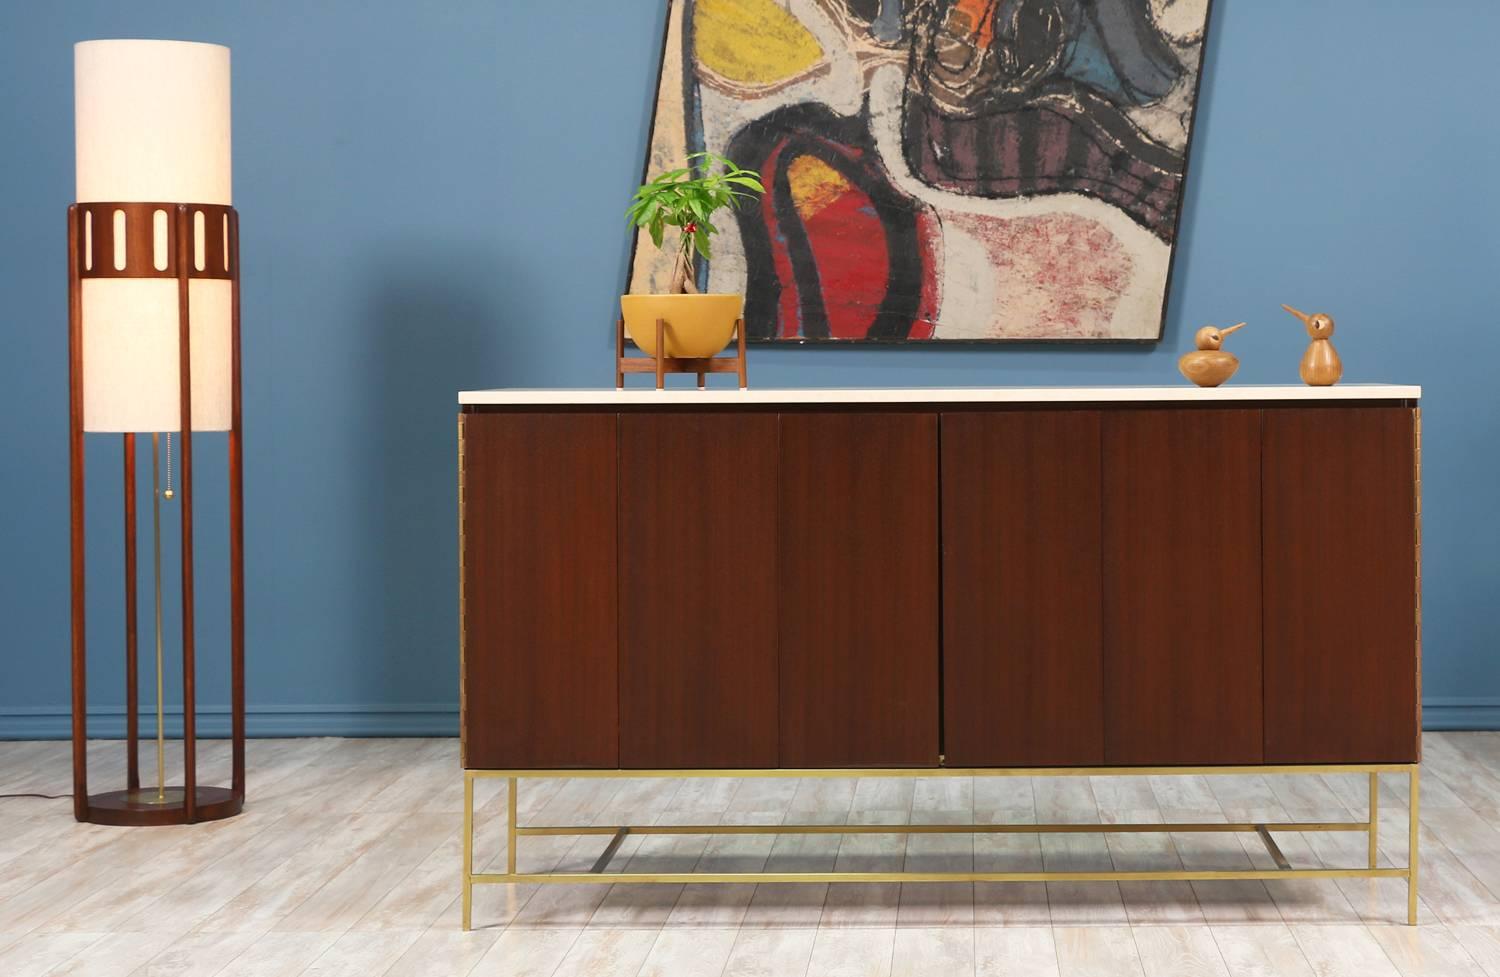 Mid Century modern credenza designed by Paul McCobb for the “Irwin Collection” at Calvin Group in the United States circa 1950’s. This stunning credenza sits on a beautiful polished brass base and features a new travertine top over the mahogany